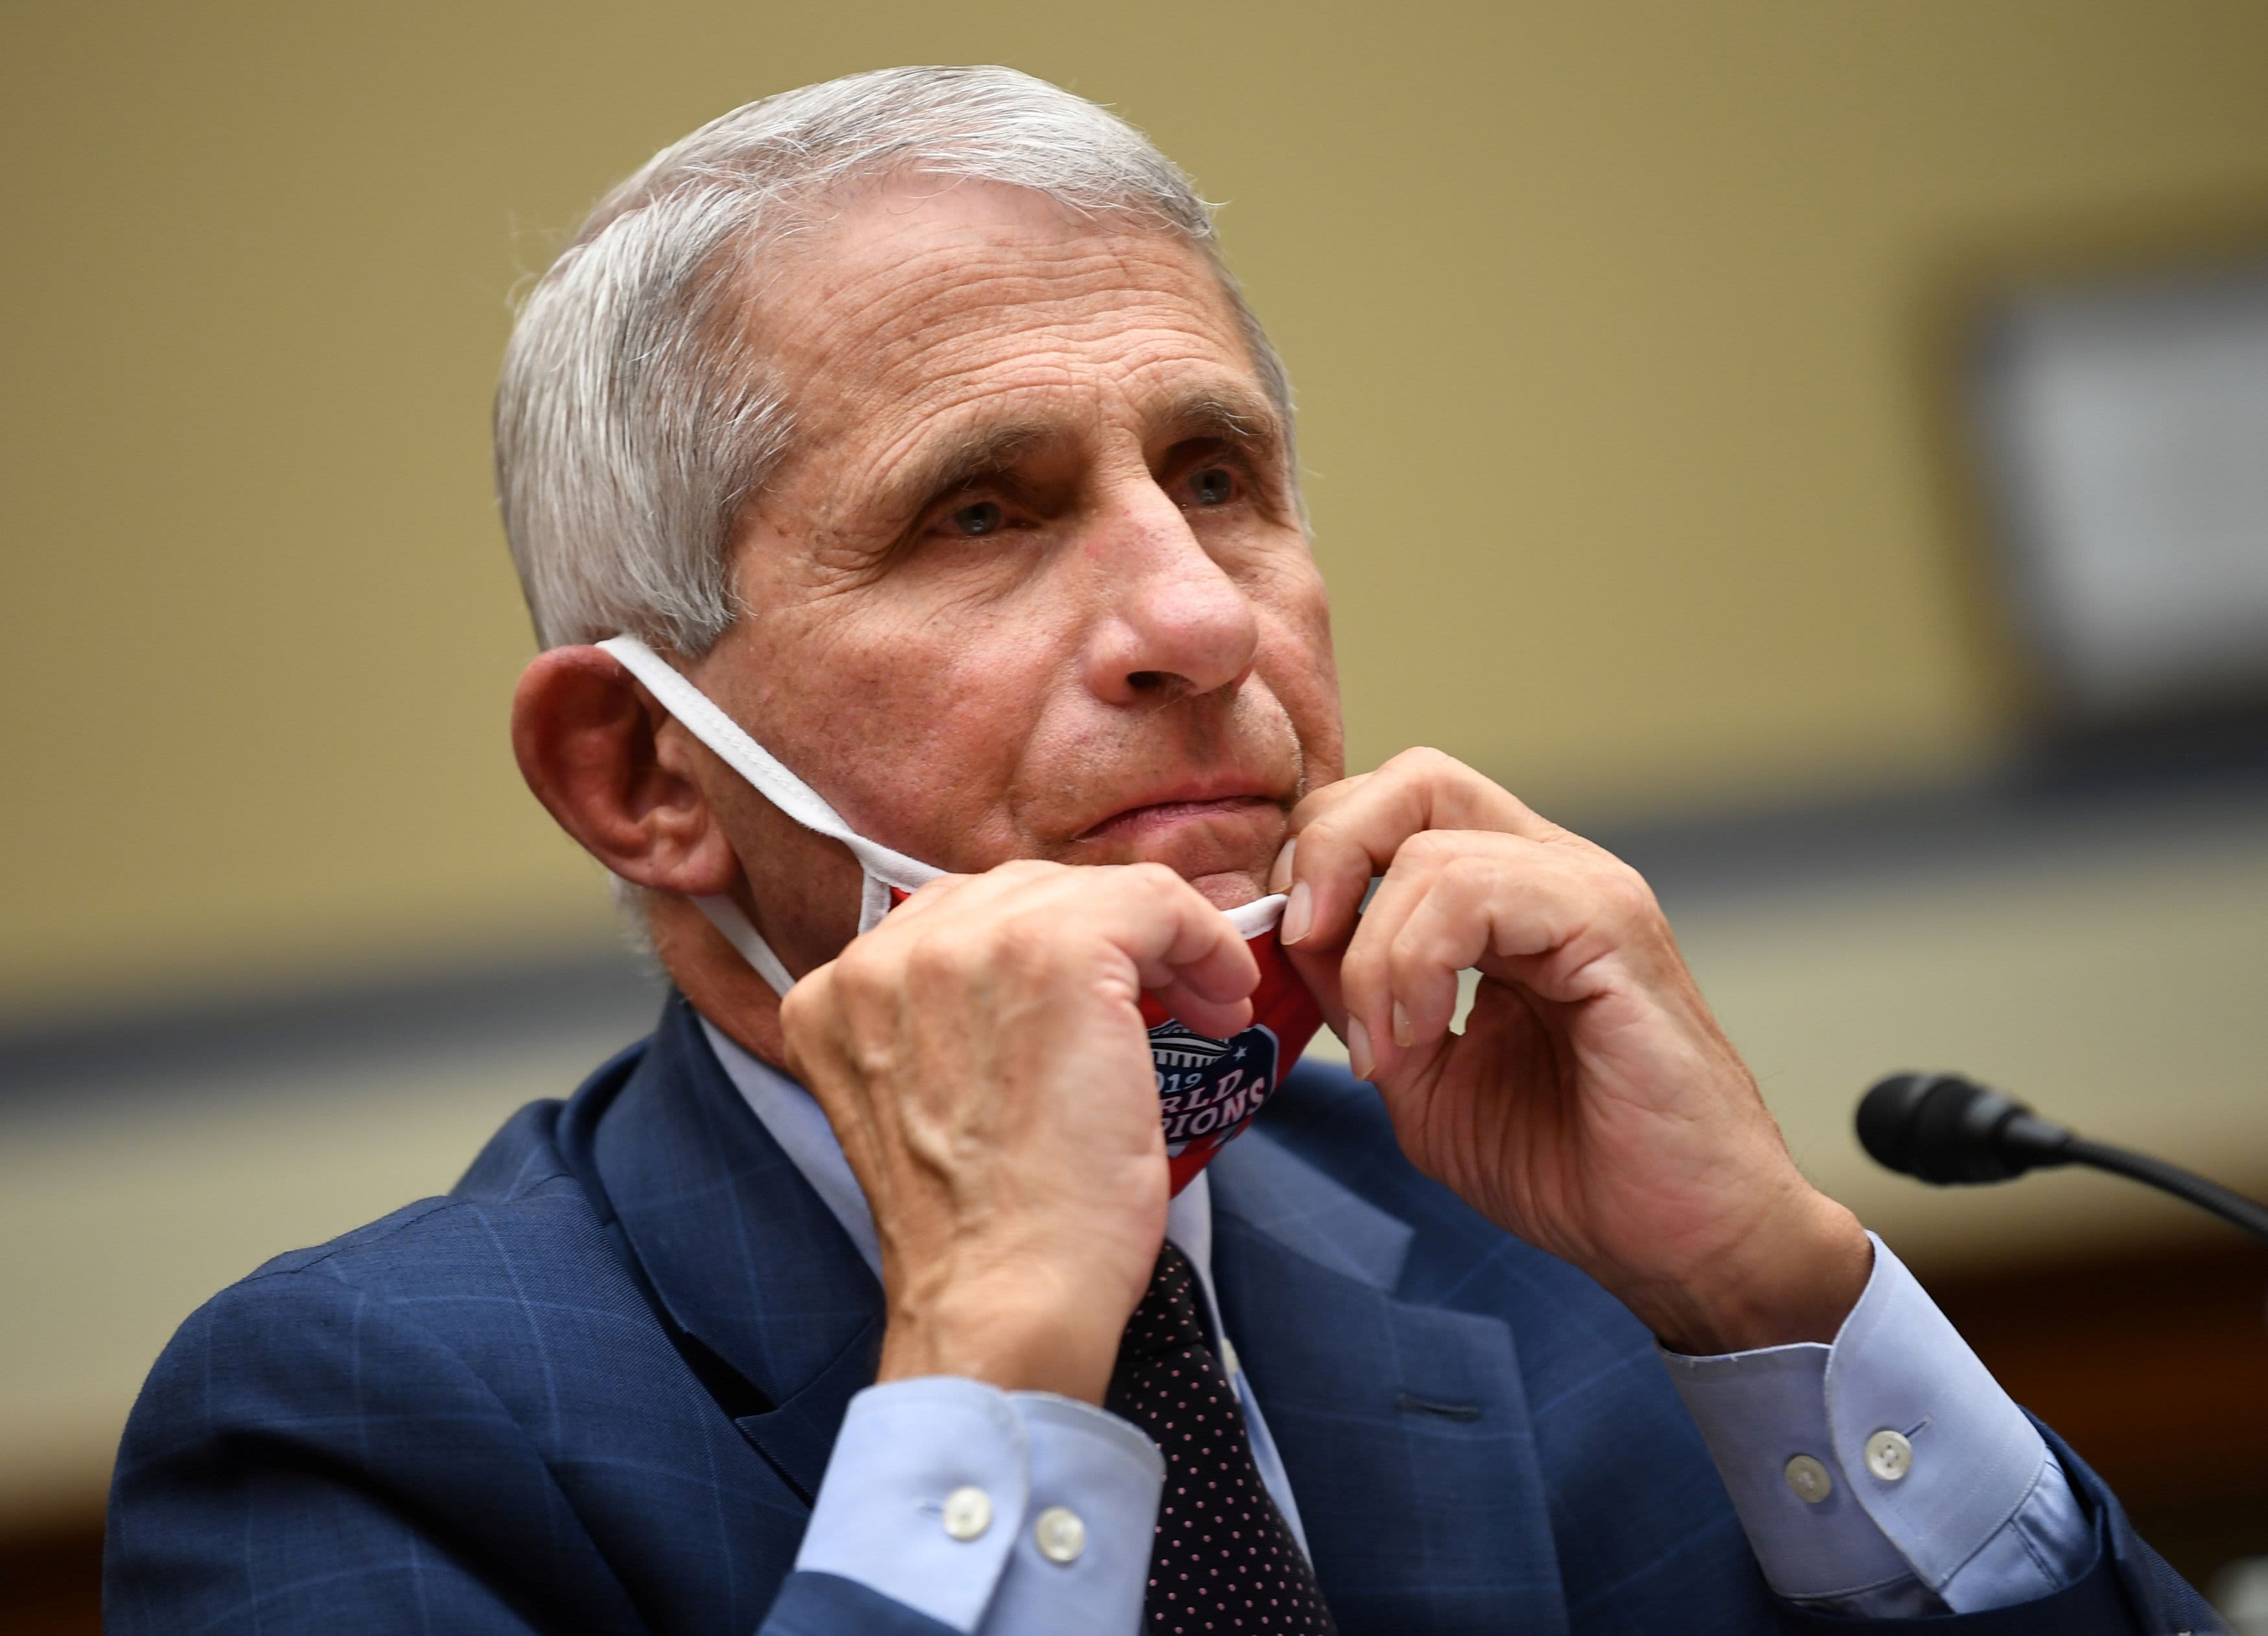 Dr. Fauci on U.S. coronavirus outbreak: 'I'm not pleased with how things are going' - CNBC